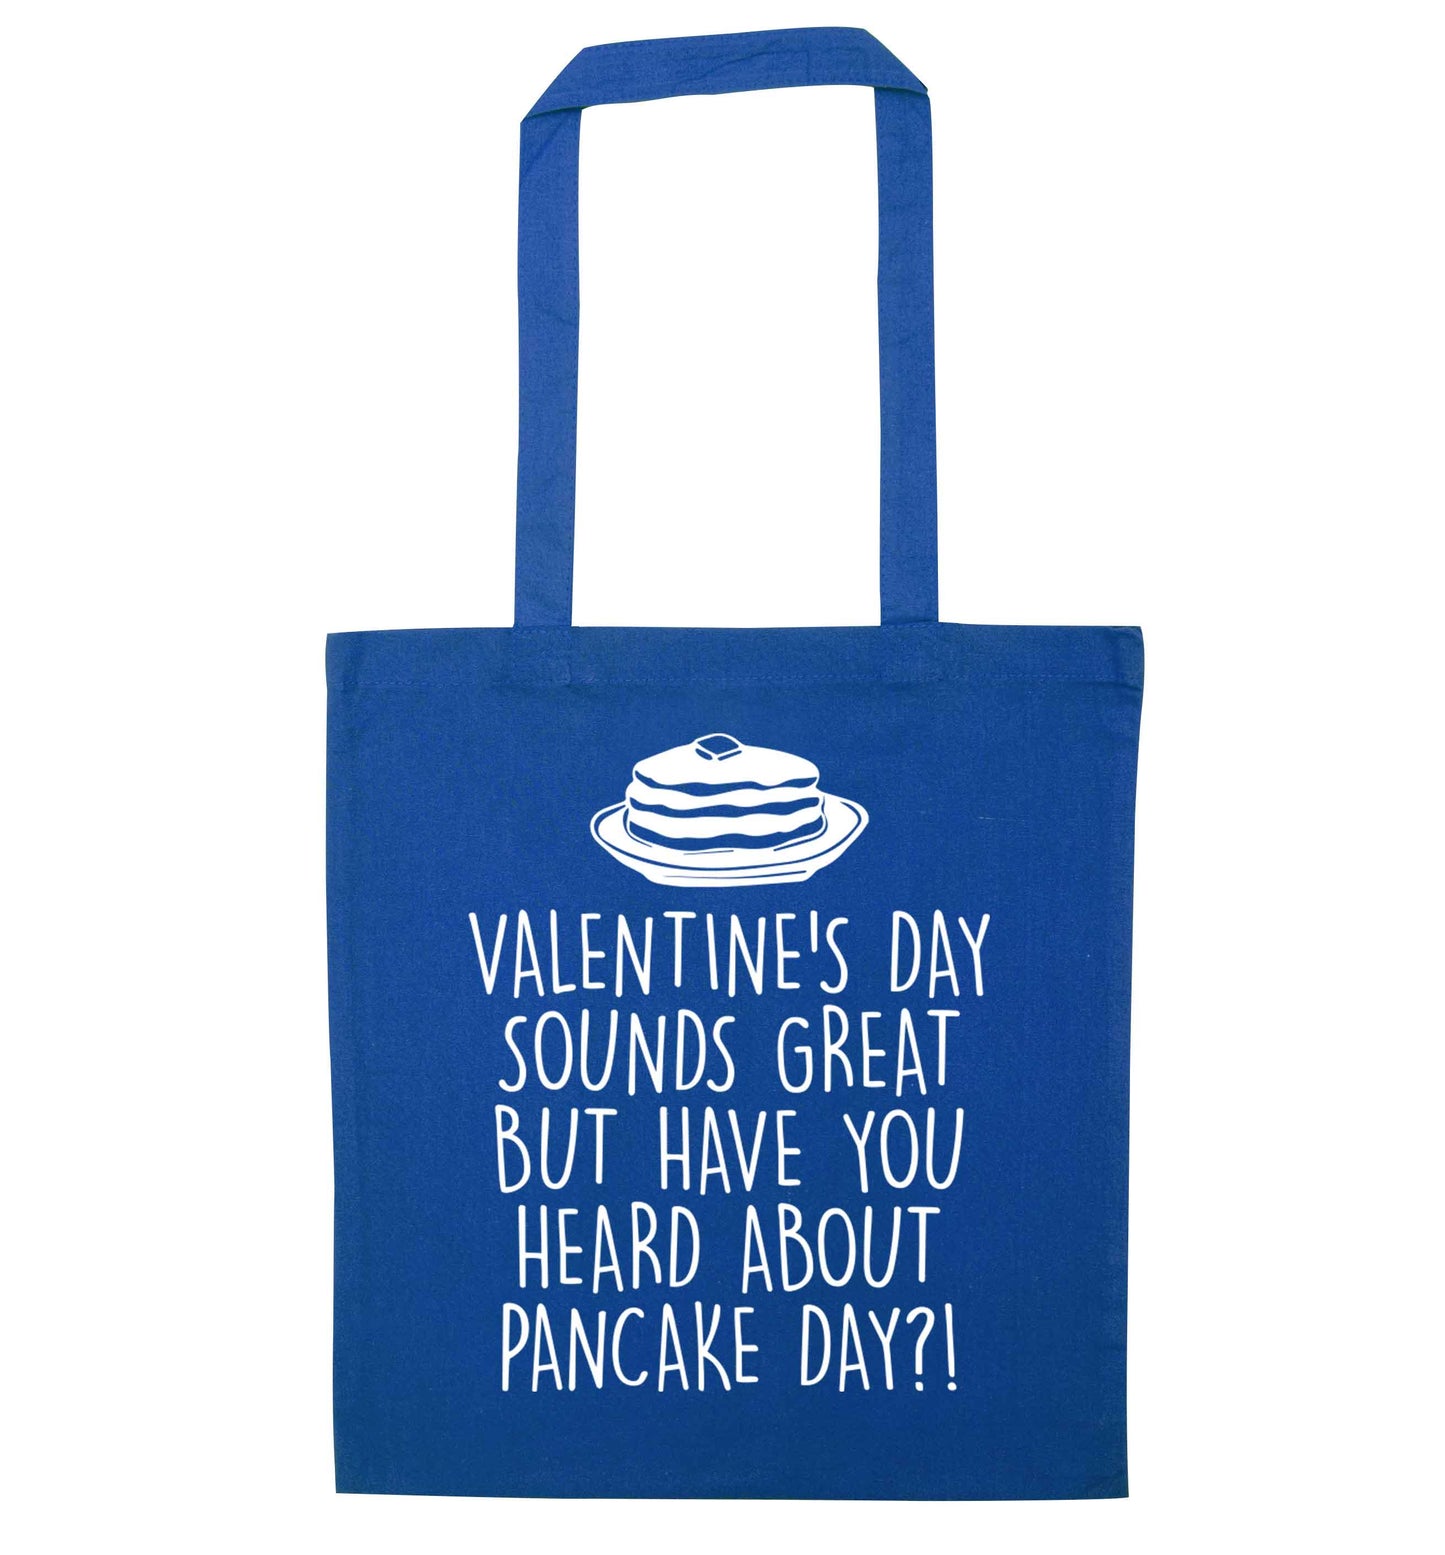 Valentine's day sounds great but have you heard about pancake day?! blue tote bag